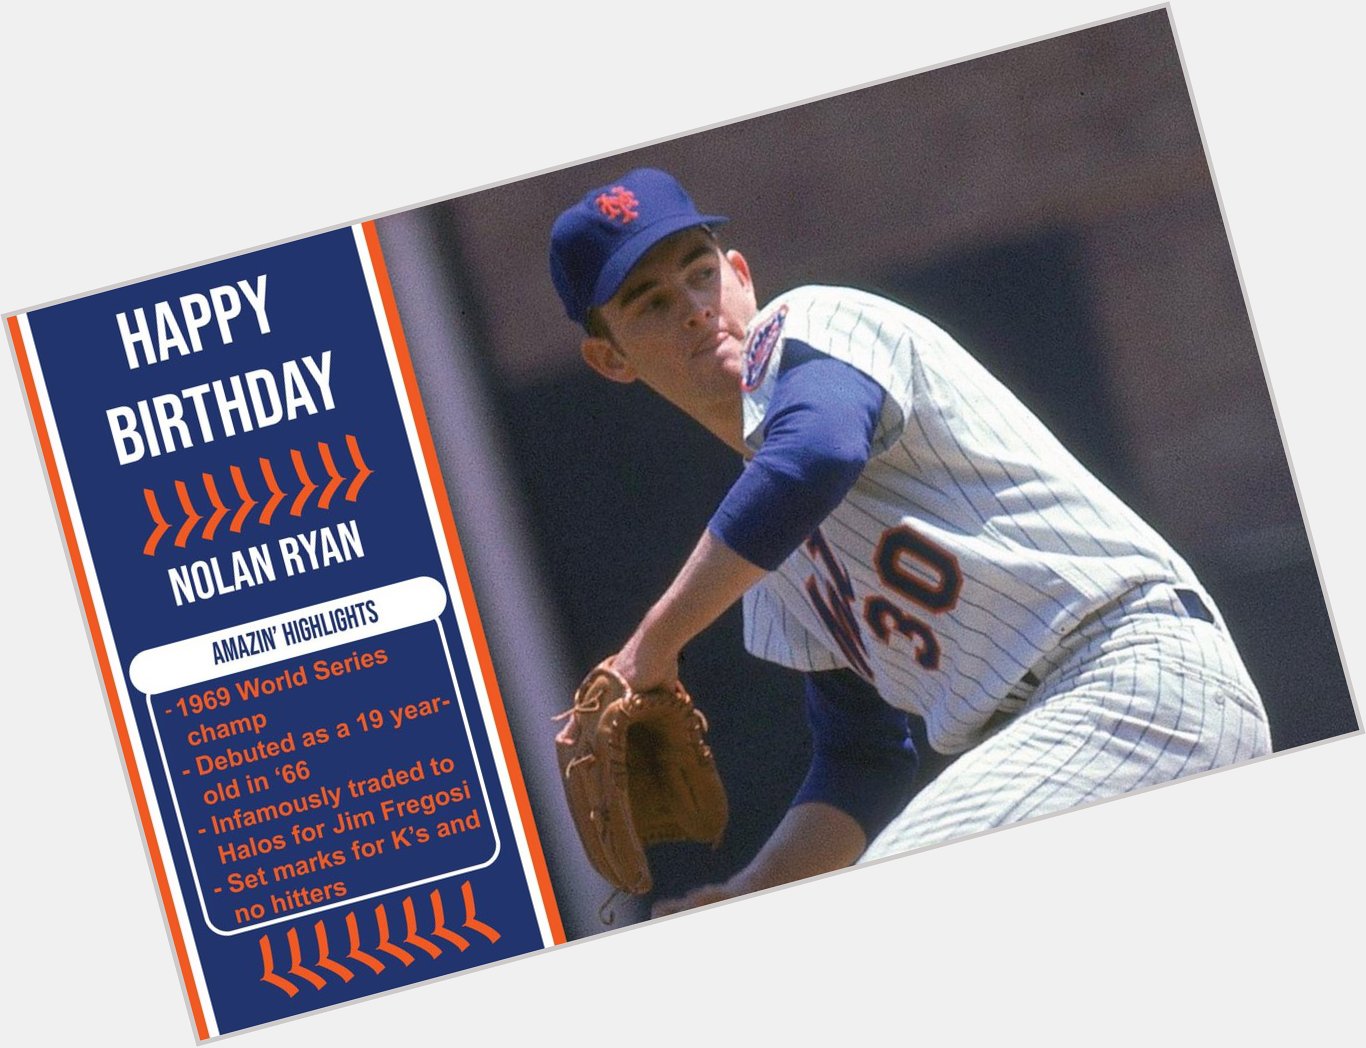 Happy 75th Birthday to 1969 World Series champ, and all-time great pitcher, Nolan Ryan! 